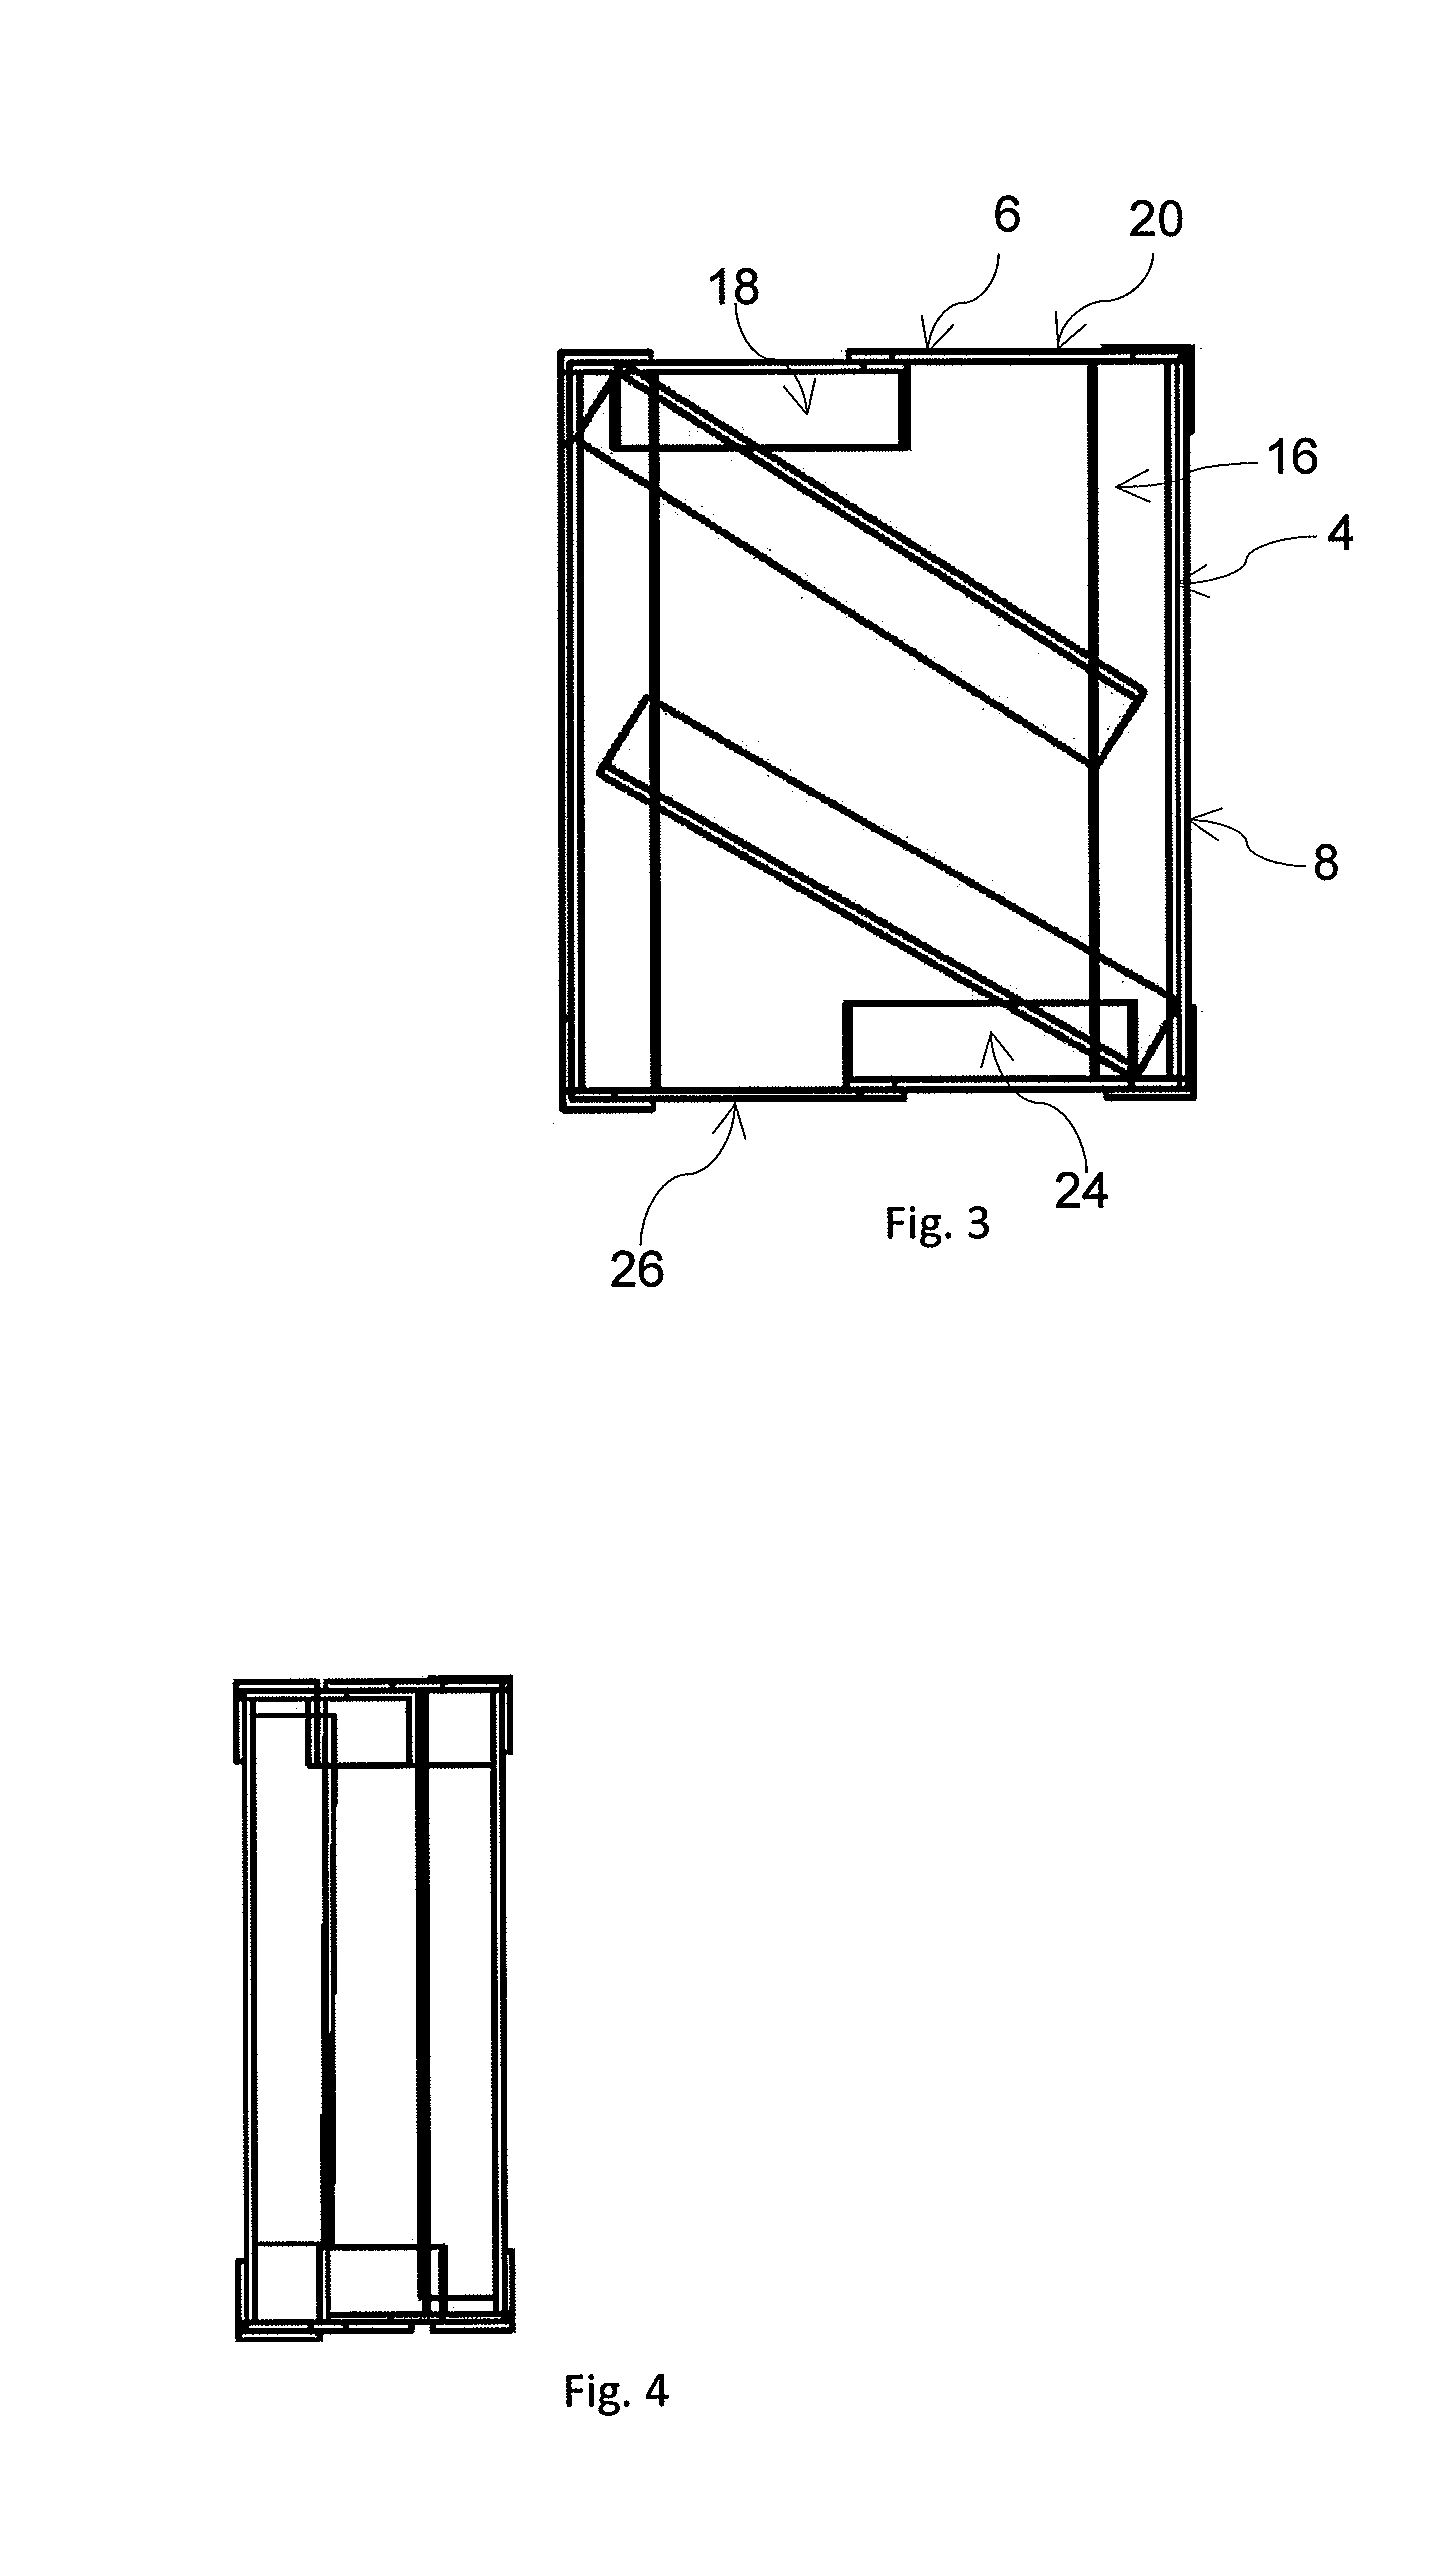 Foldable product display structure